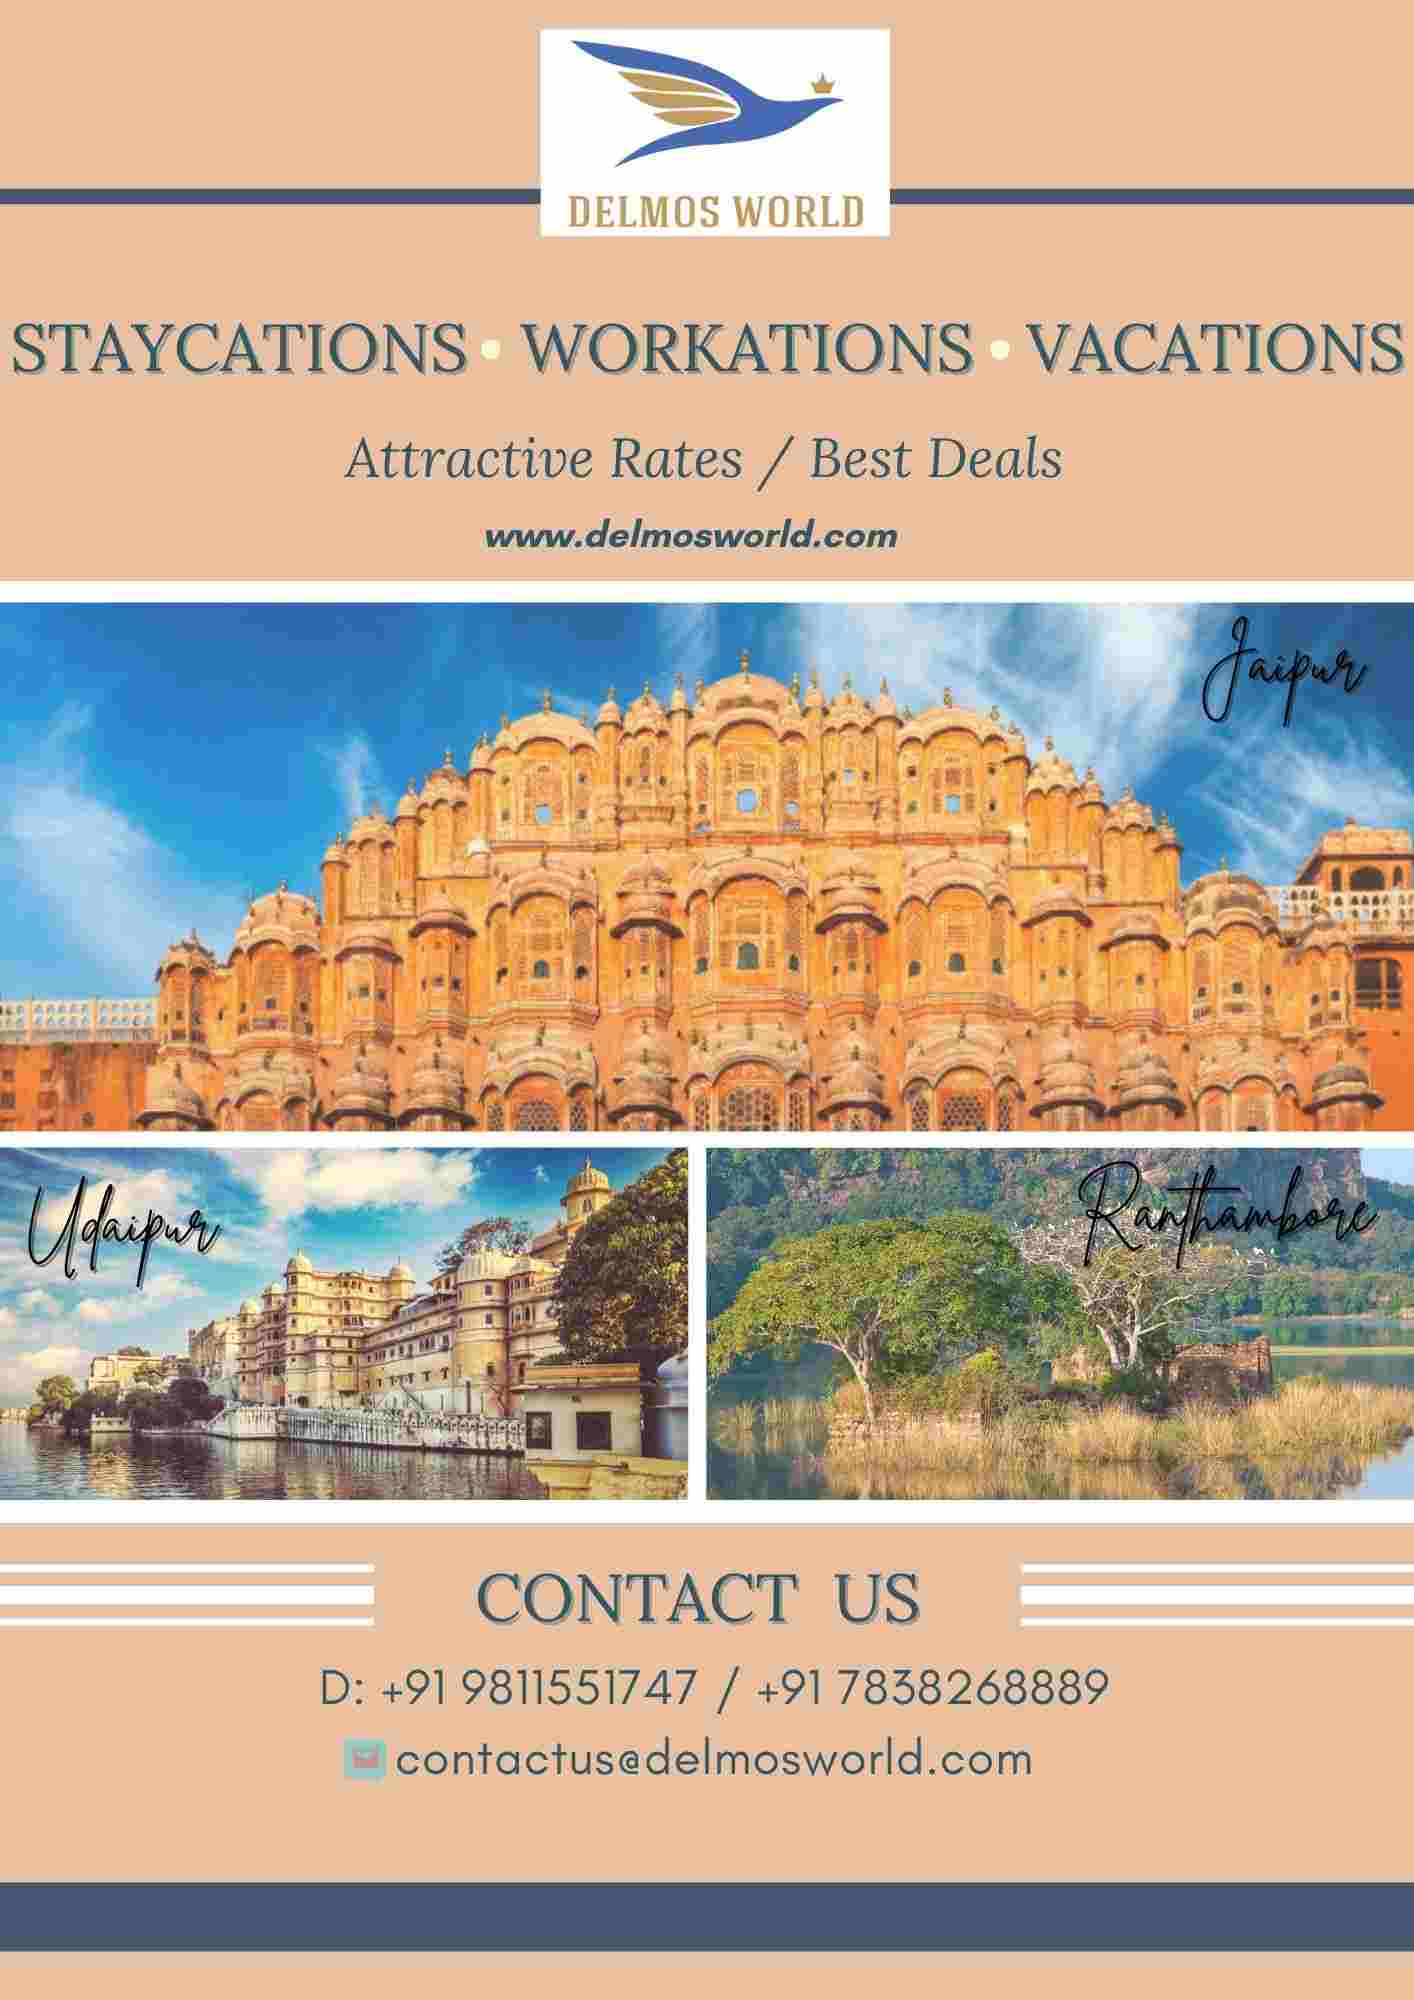 Staycations - Workations - Vacations